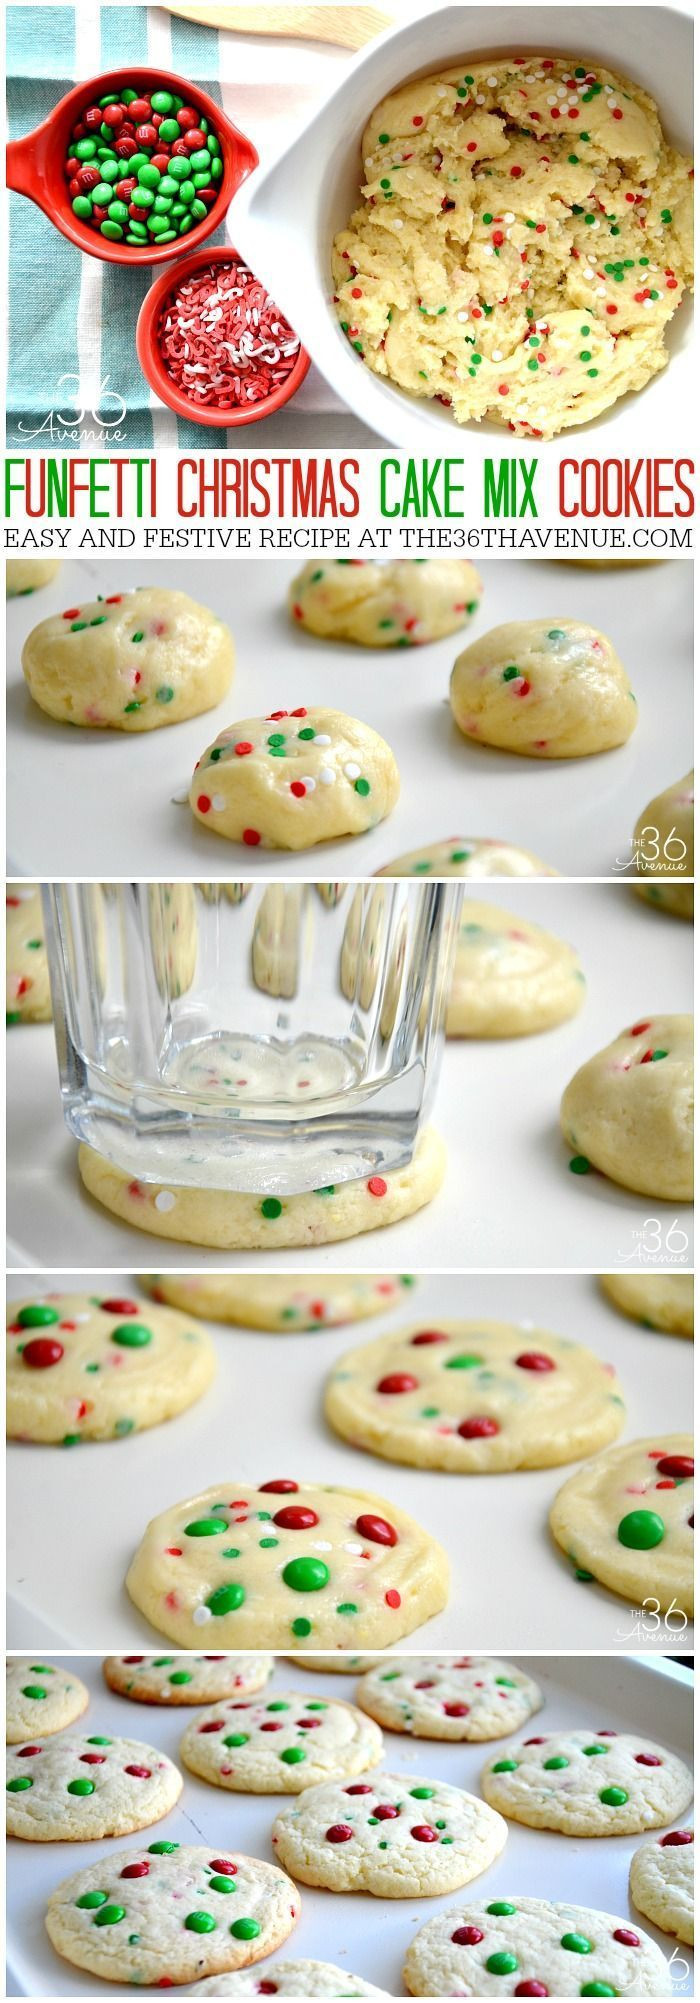 Easy Christmas Cookies Pinterest
 100 Christmas Cookie Recipes on Pinterest